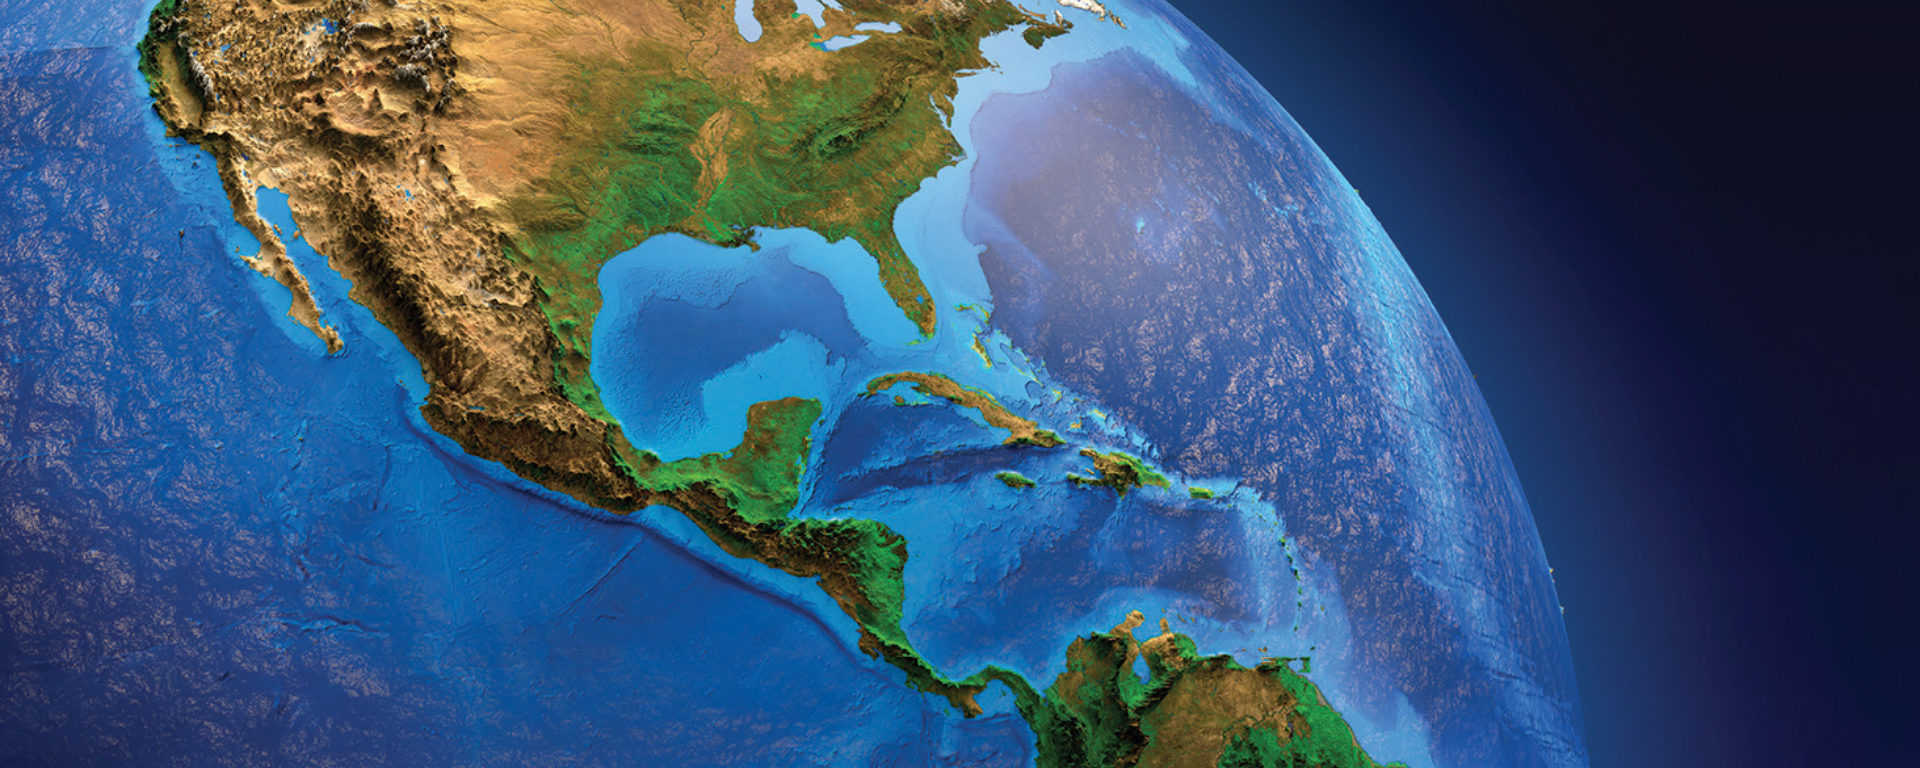 Illustration of North America from outer space